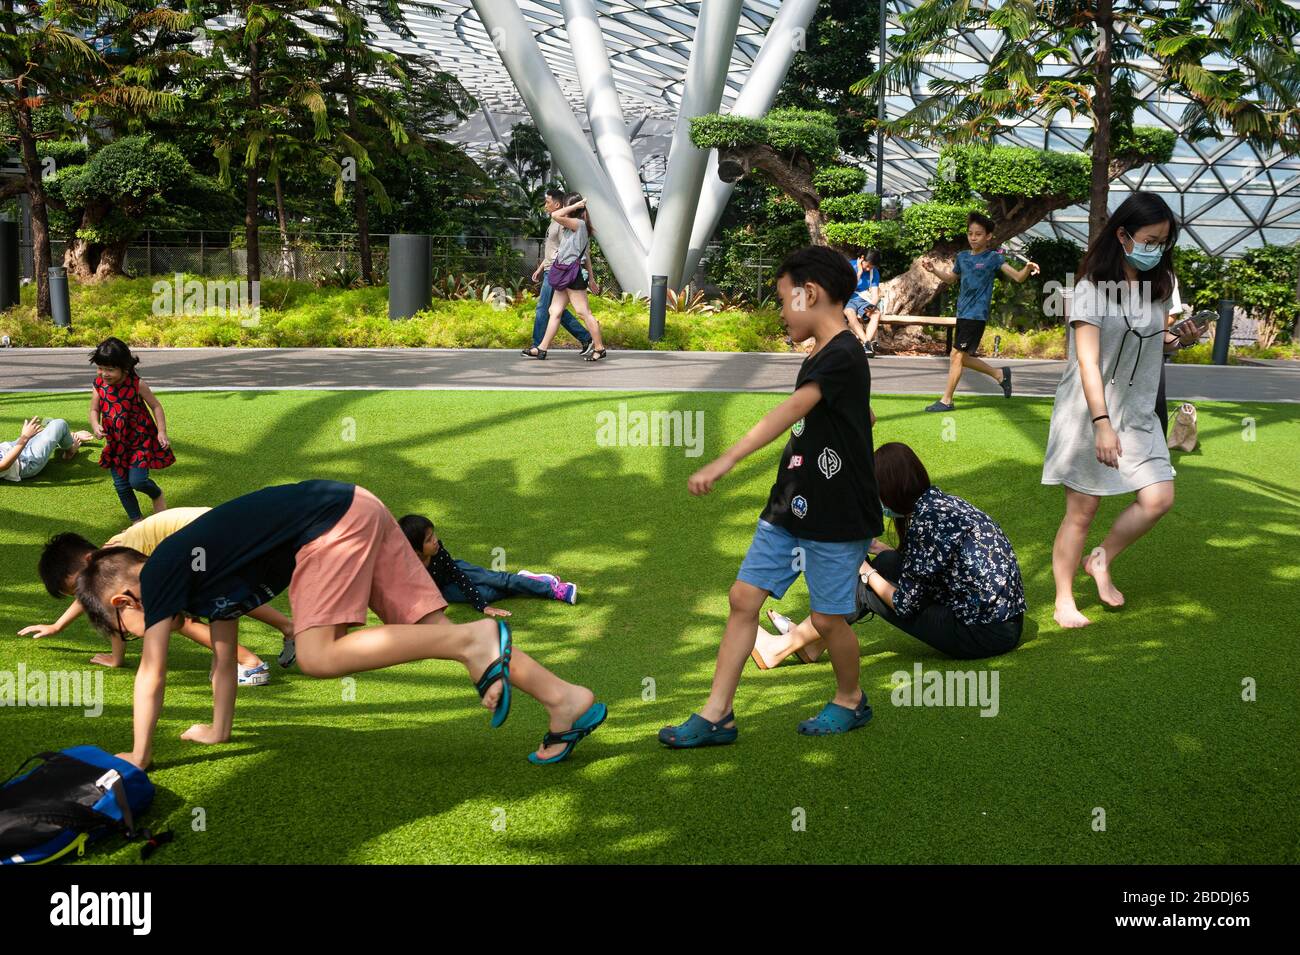 18.03.2020, Singapore, , Singapore - Children play on the artificial grass of Foggy Bowls, a playground surrounded by pine trees in Canopy Park, in th Stock Photo